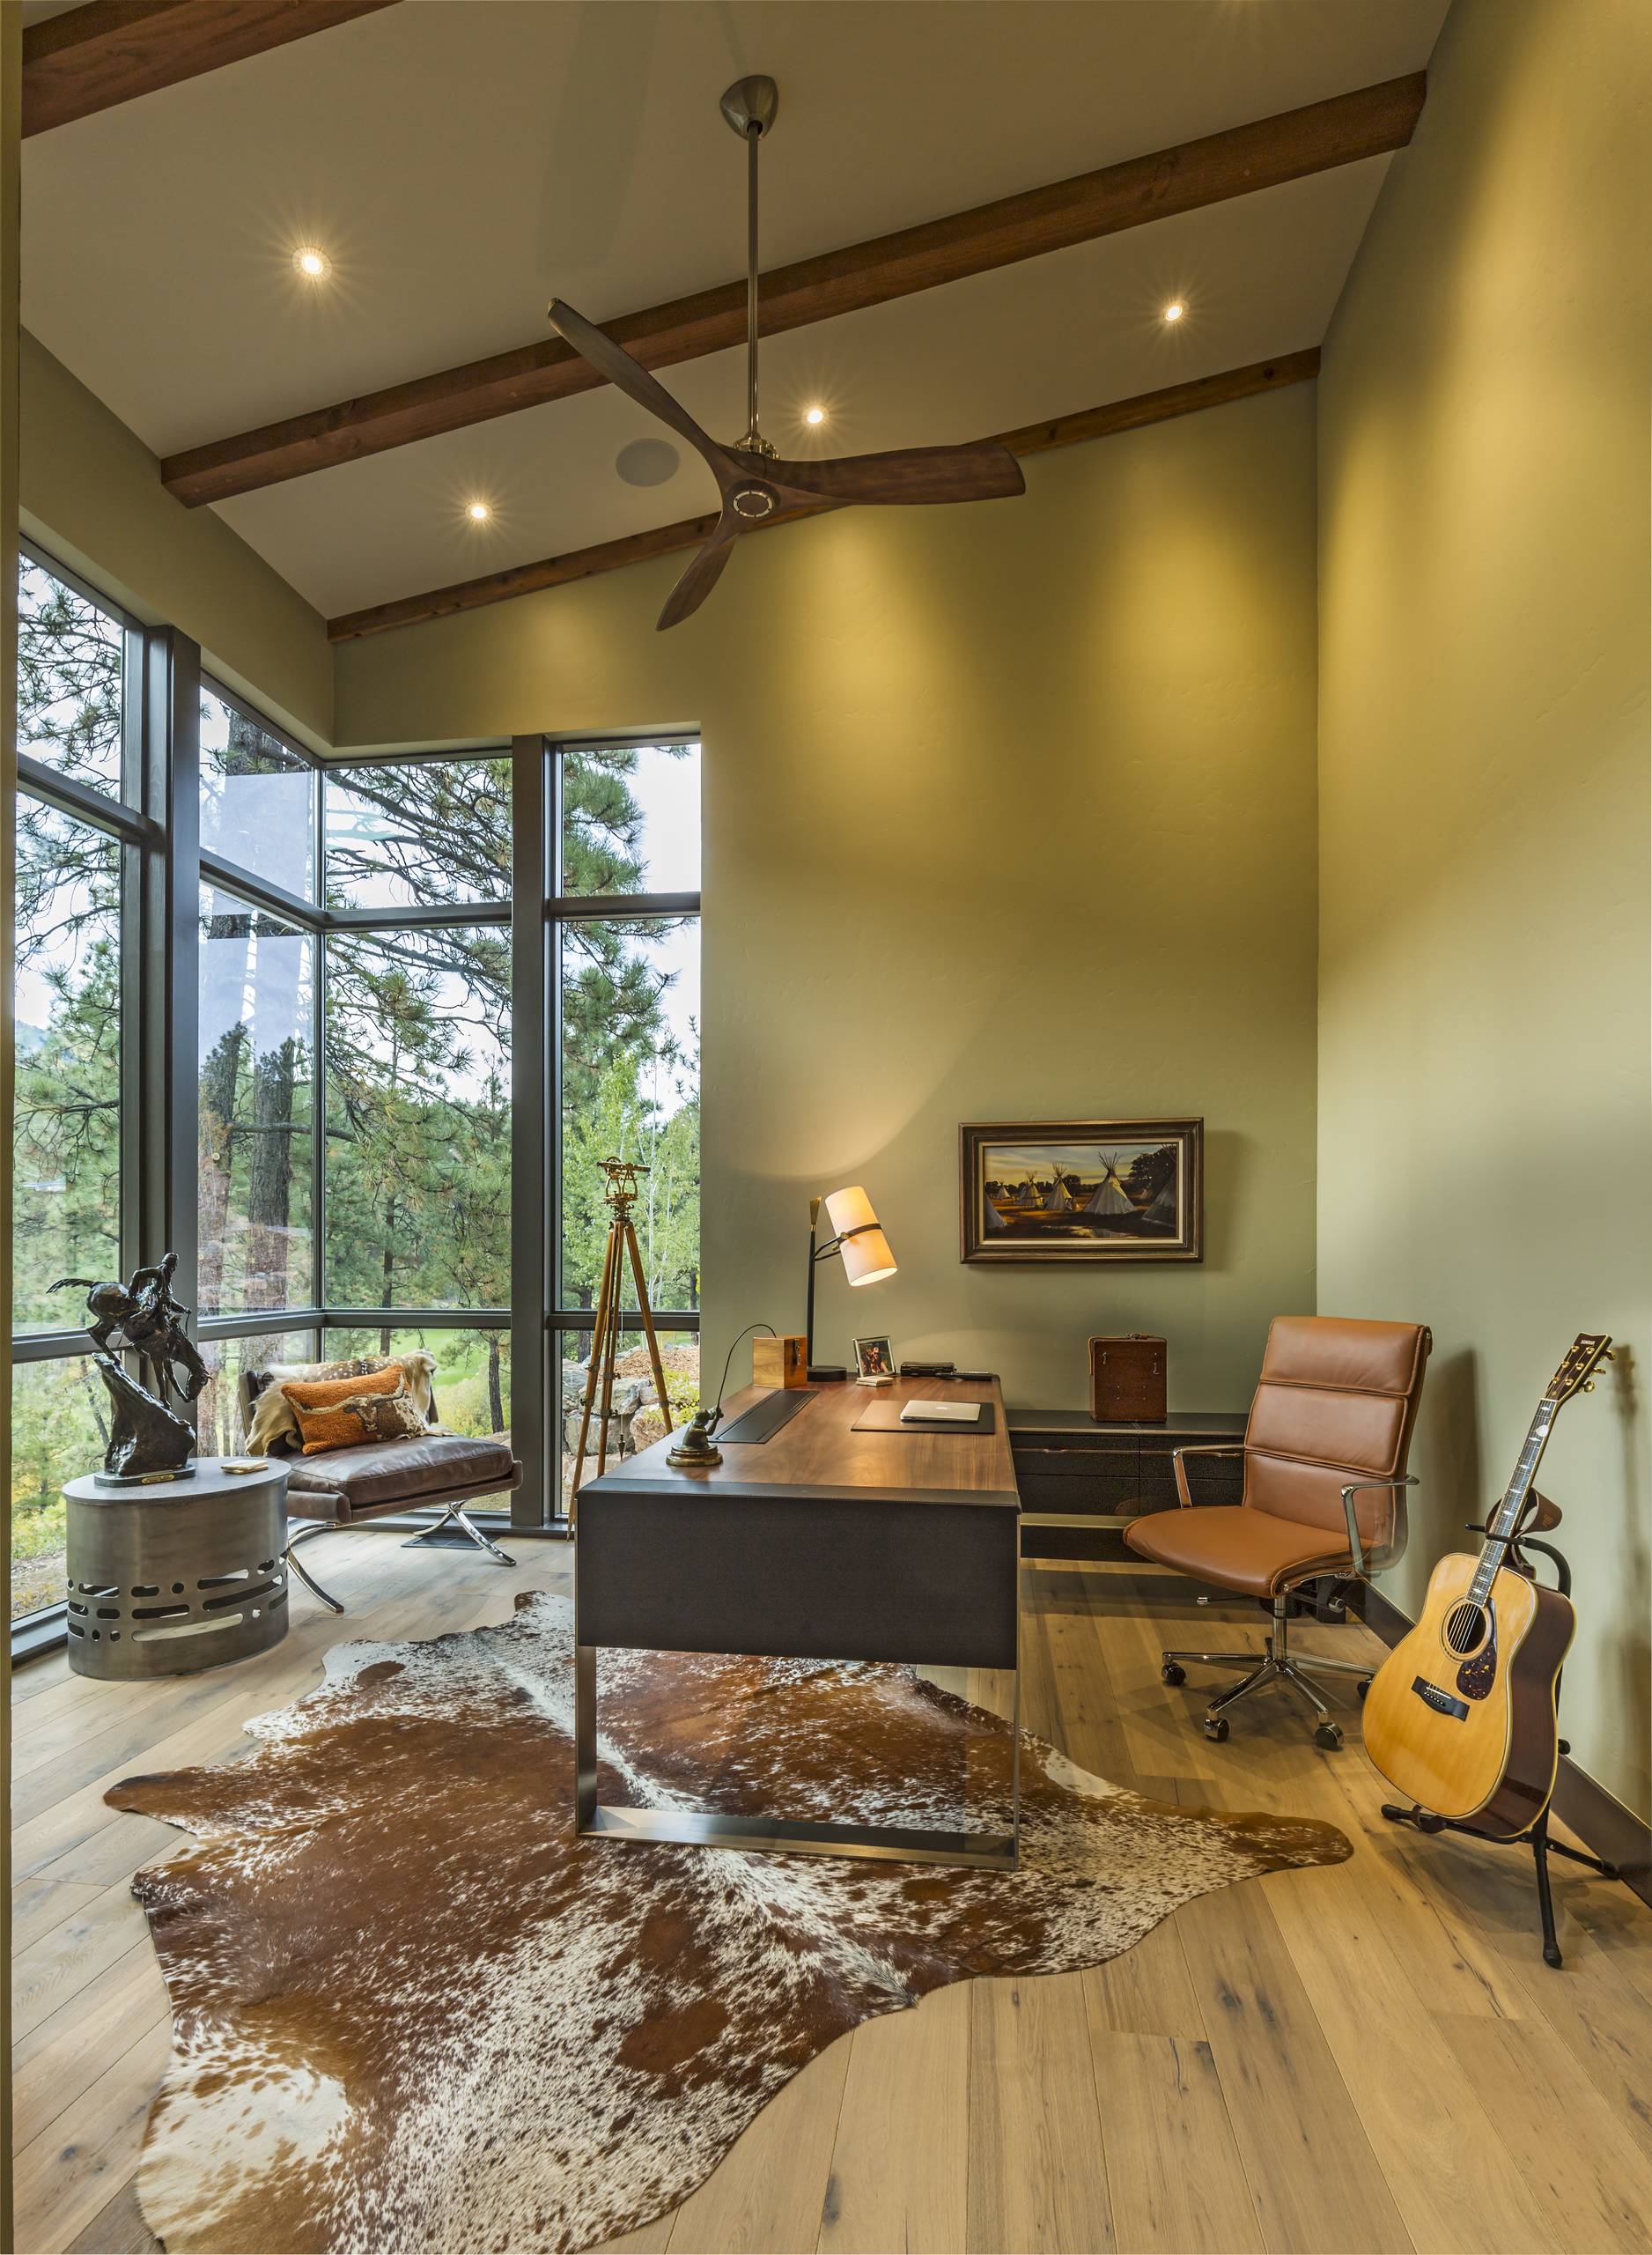 https://st.hzcdn.com/simgs/pictures/home-offices/certified-luxury-builders-veritas-fine-homes-telluride-co-custom-home-g-terbrock-luxury-homes-img~a4a11cd20b82ab5f_14-6424-1-4739504.jpg